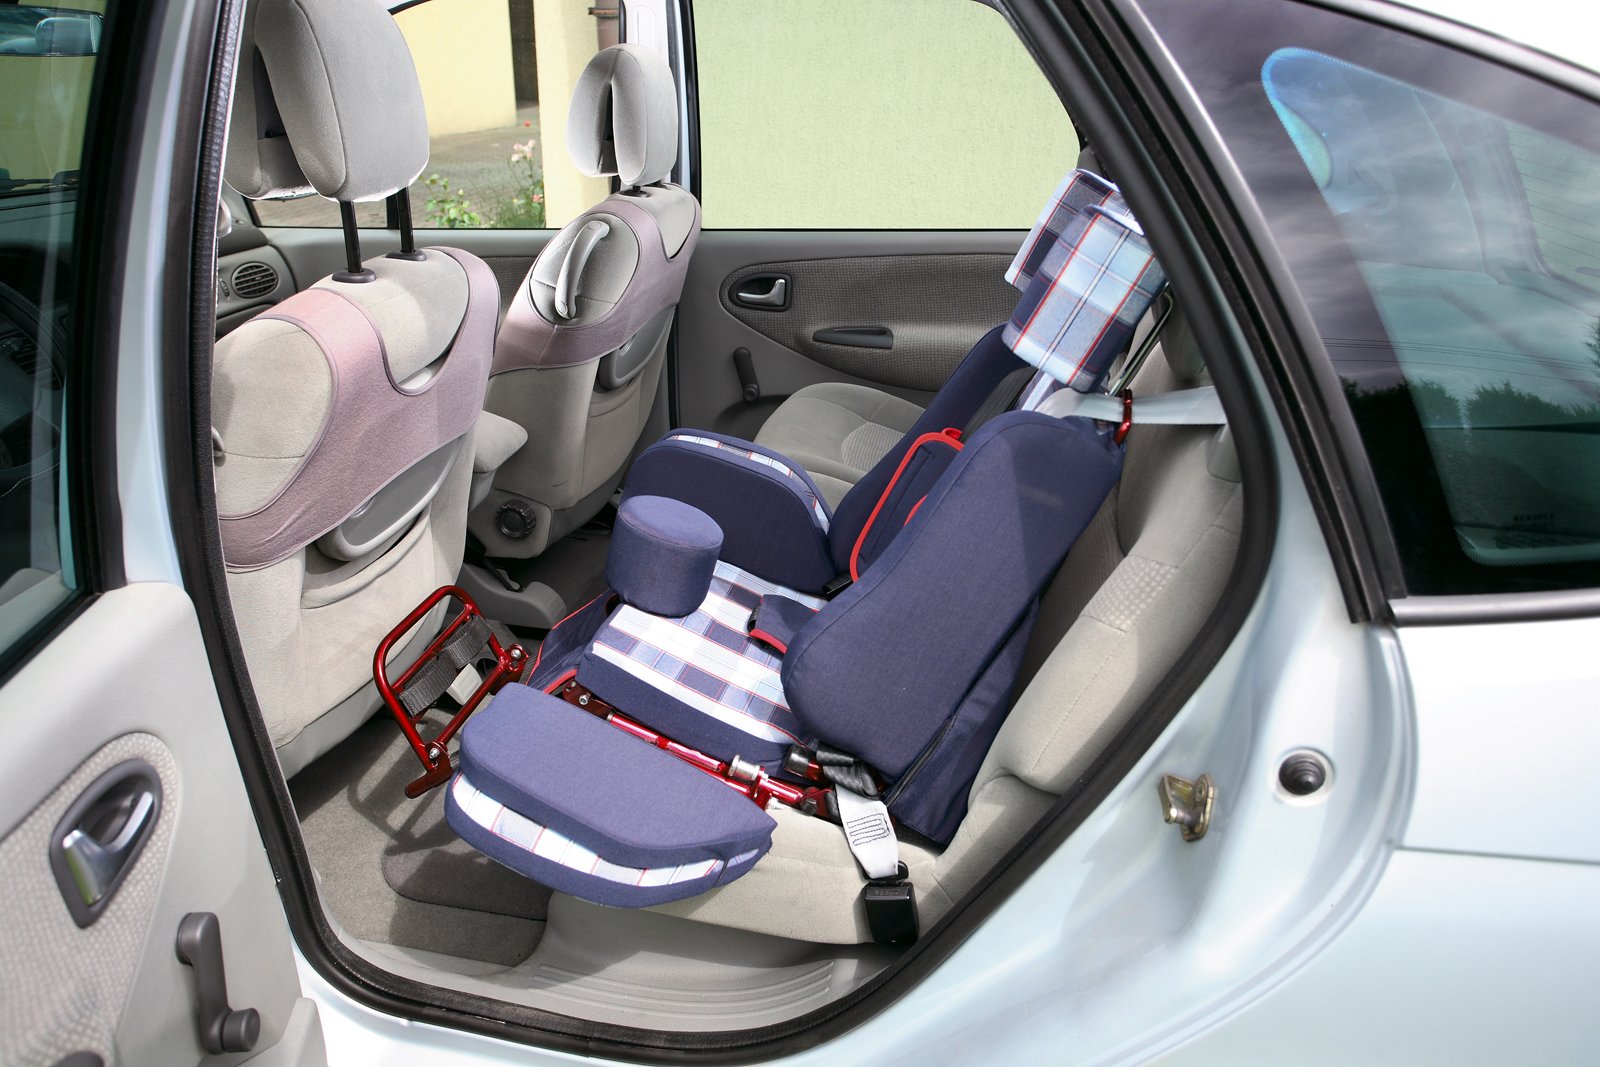 Special Needs Seating: Adaptable Car Seats for Children with Unique Requirements